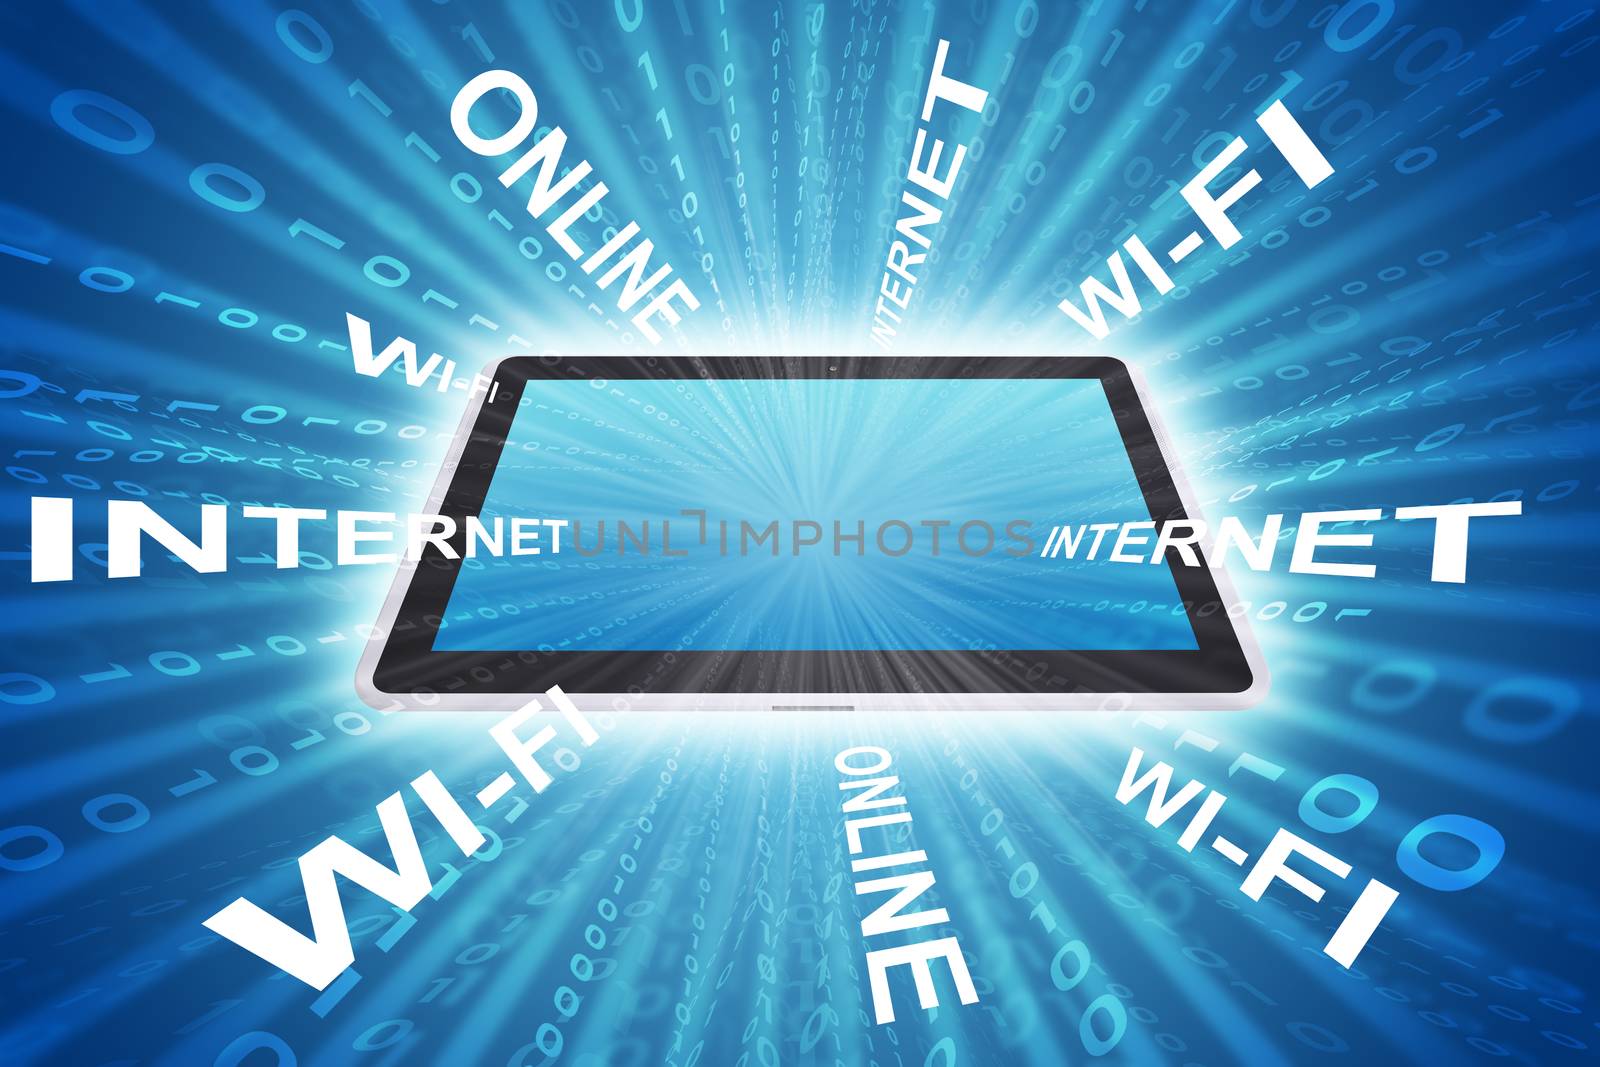 Tablet on abstract blue background with business words